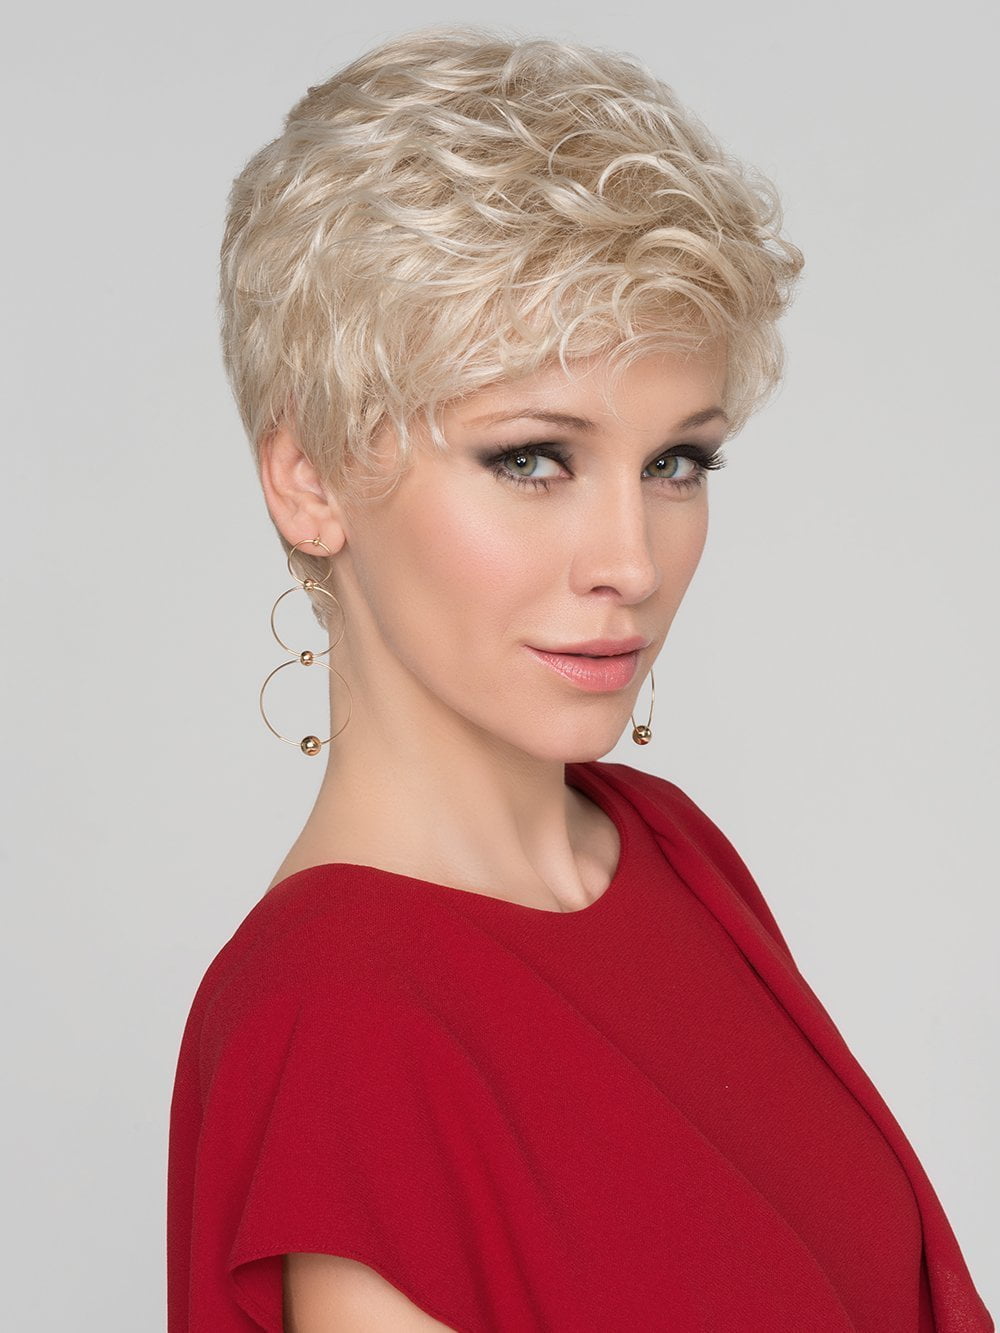 Wear this classic short wig smooth and chic or style with product to create a more modern take